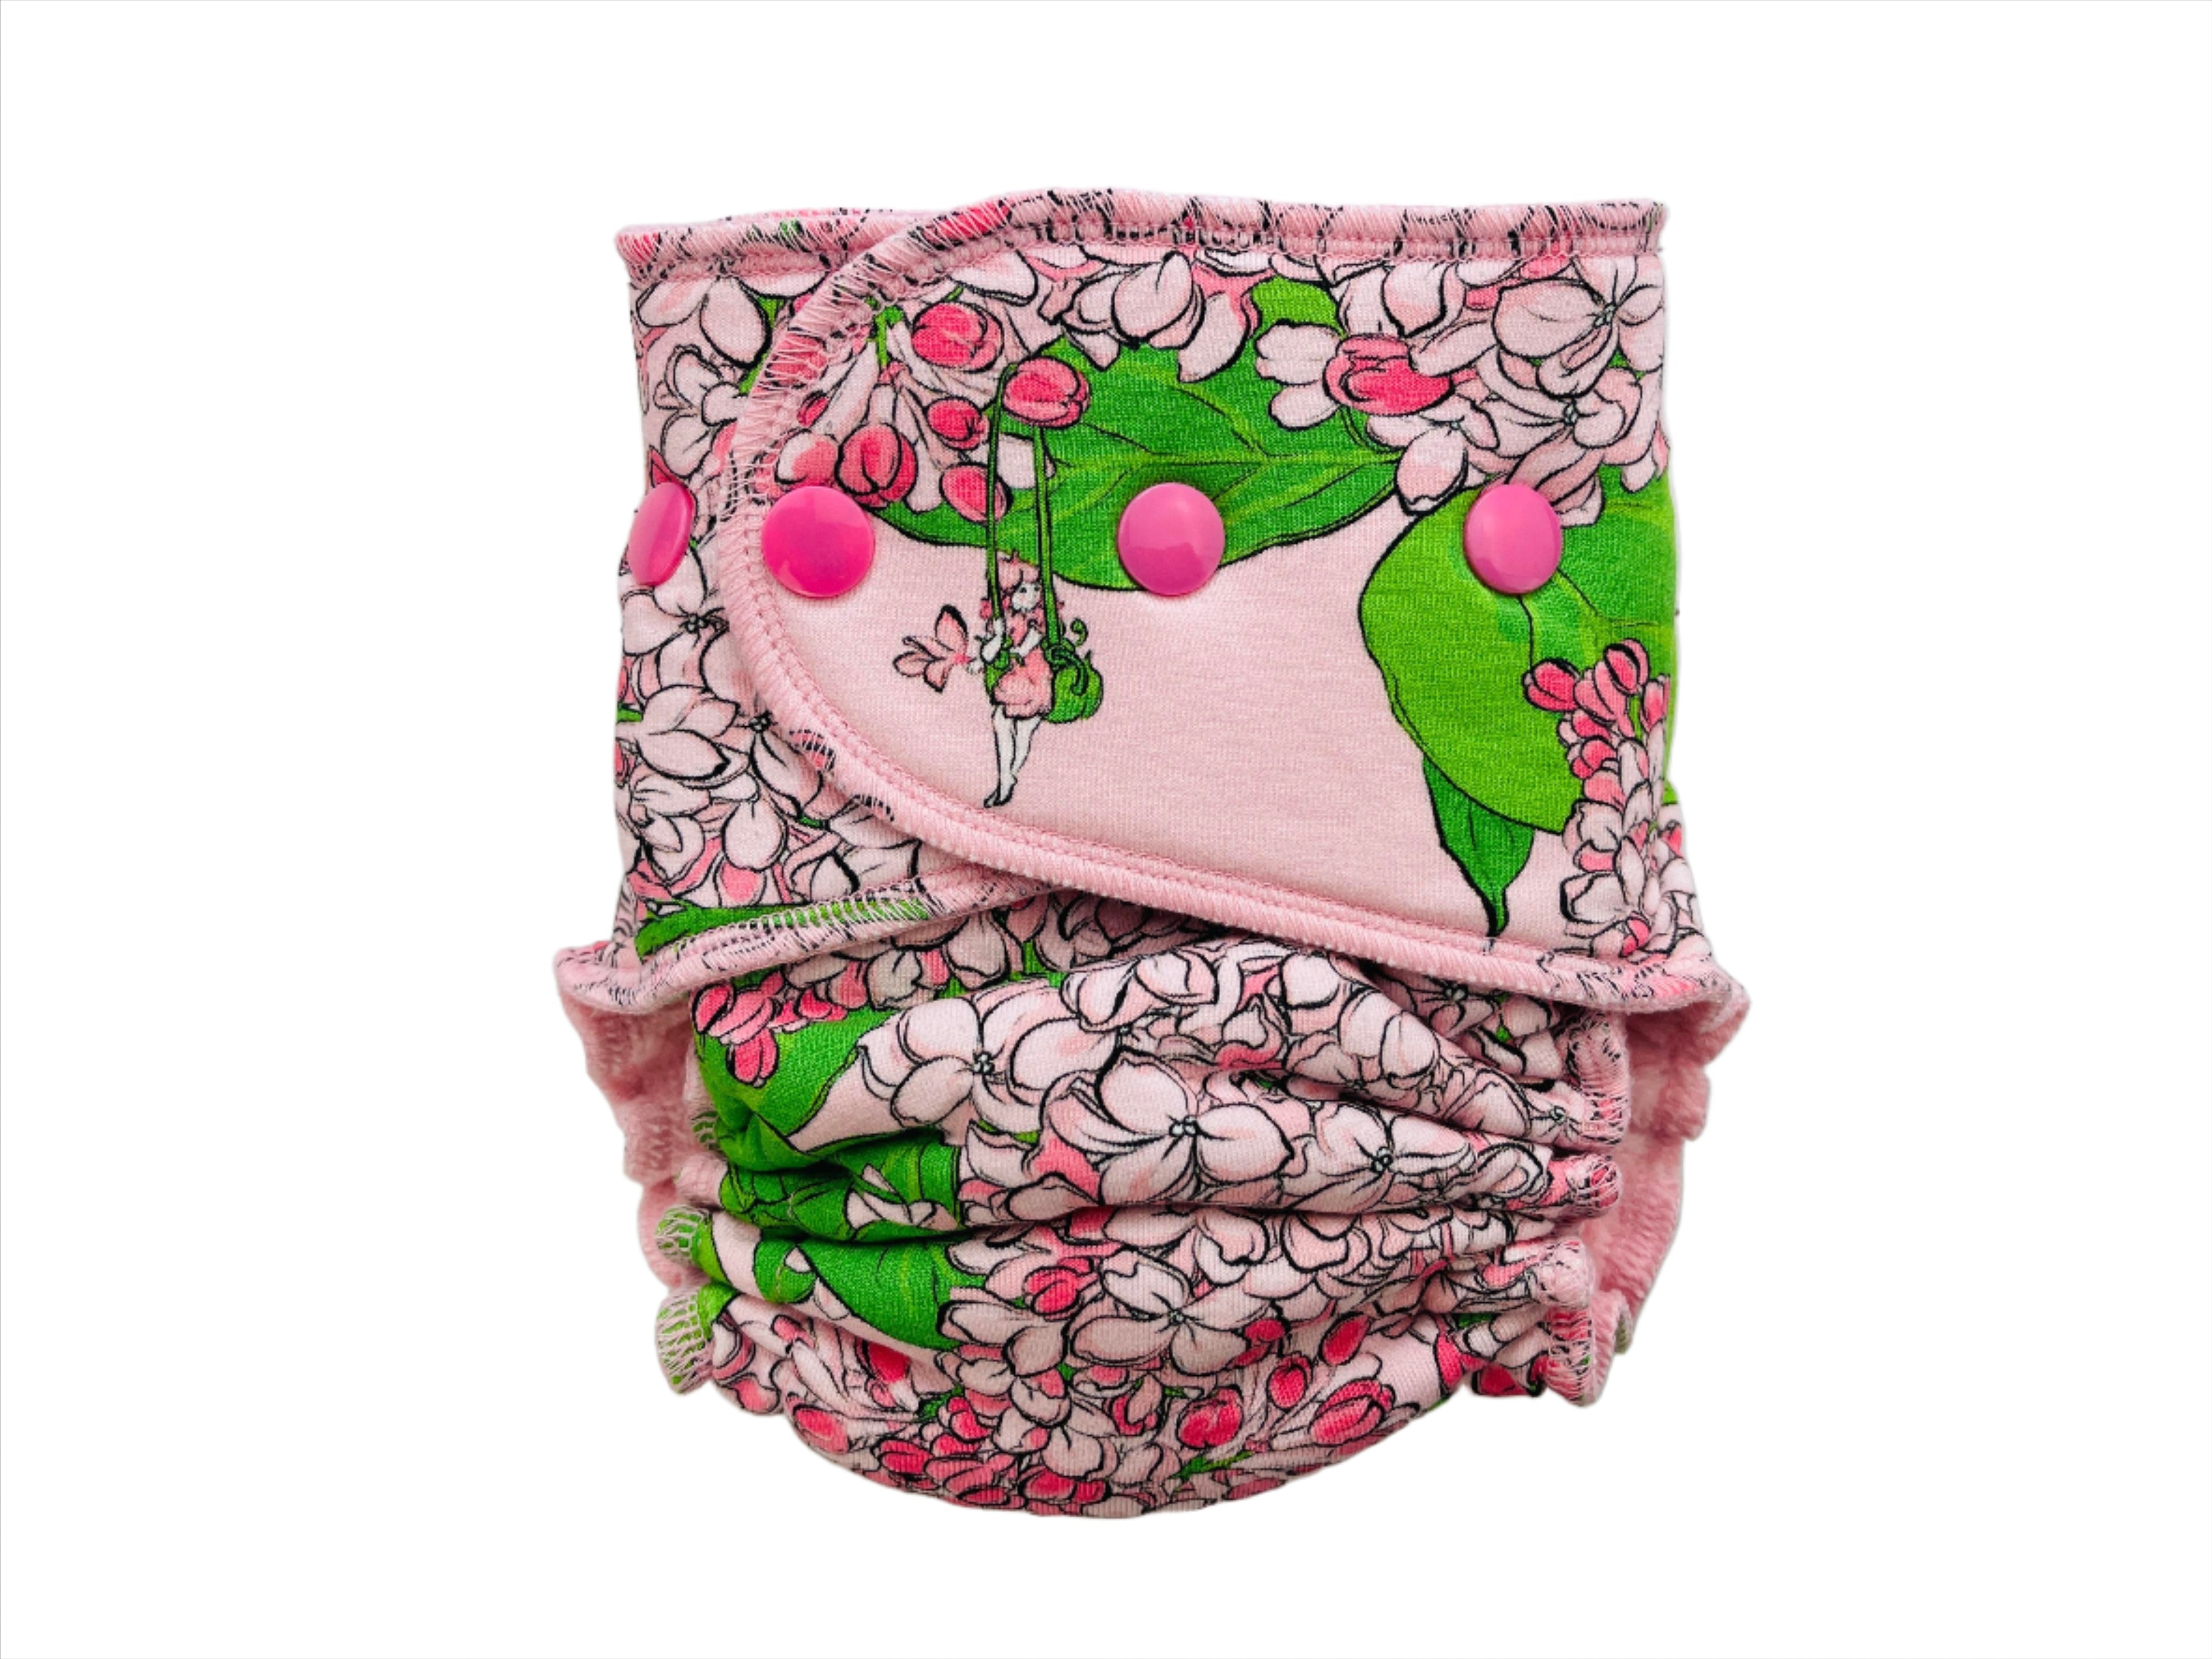 Lilly & Frank Fitted Cloth Diaper Meadowsweet Petite Hybrid Cloth Diaper - Hybrid - Classic Serged